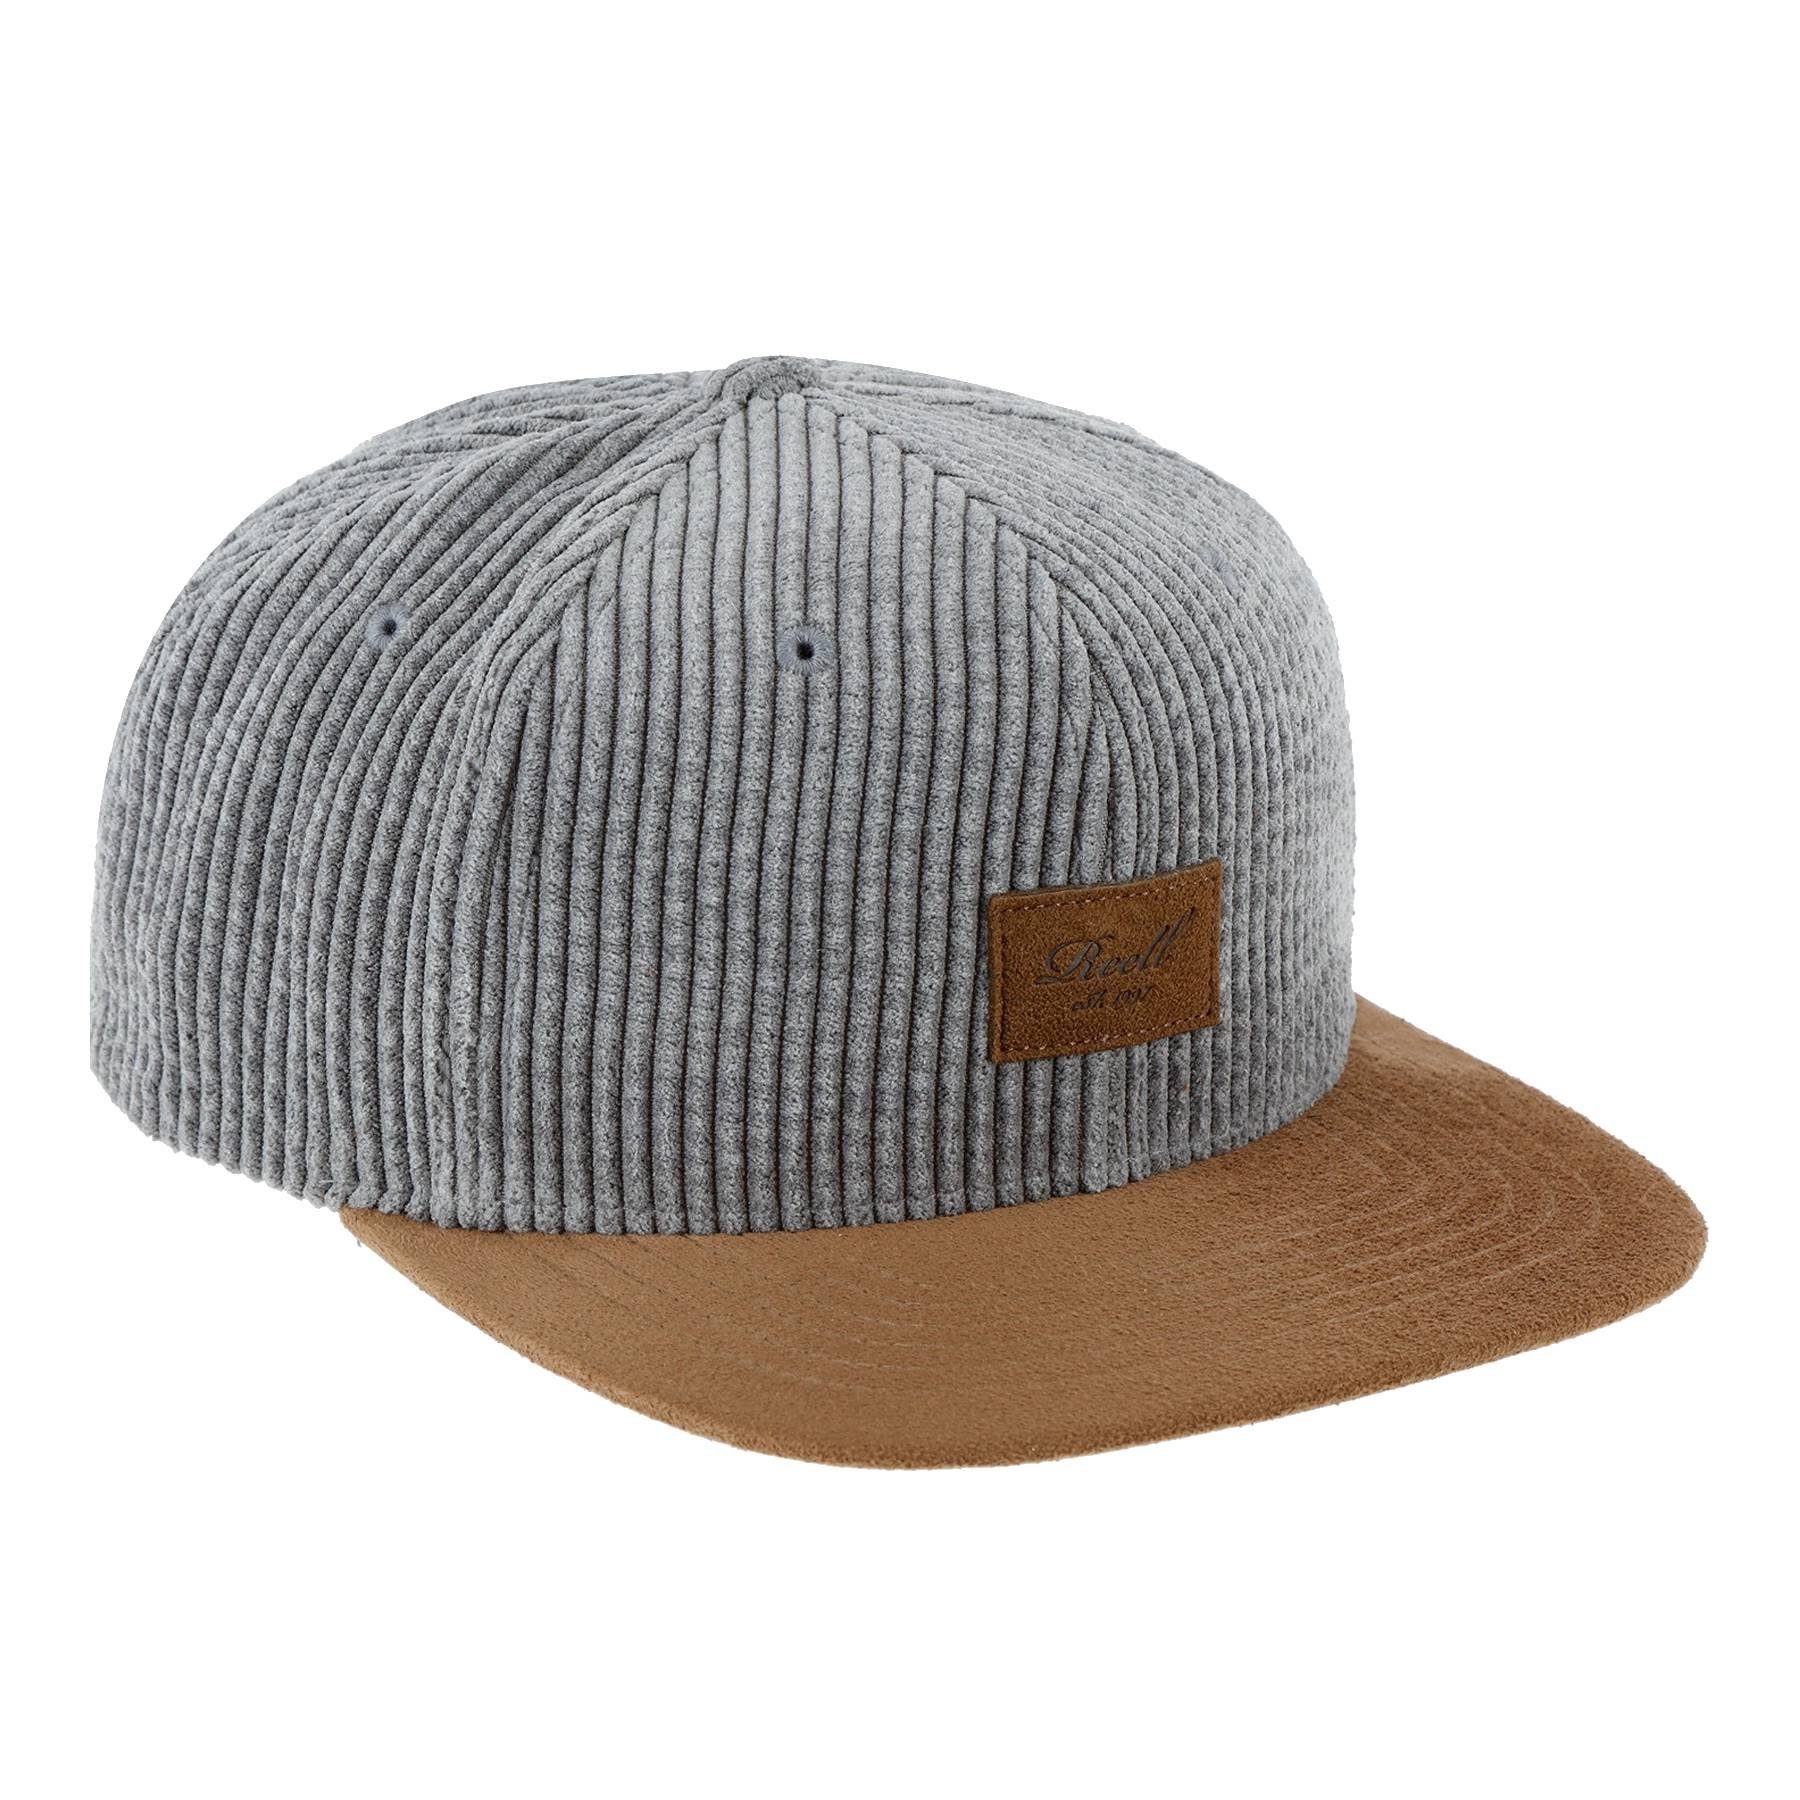 REELL Baseball Suede Cord silver Cap Cap (1-St) co. Reell